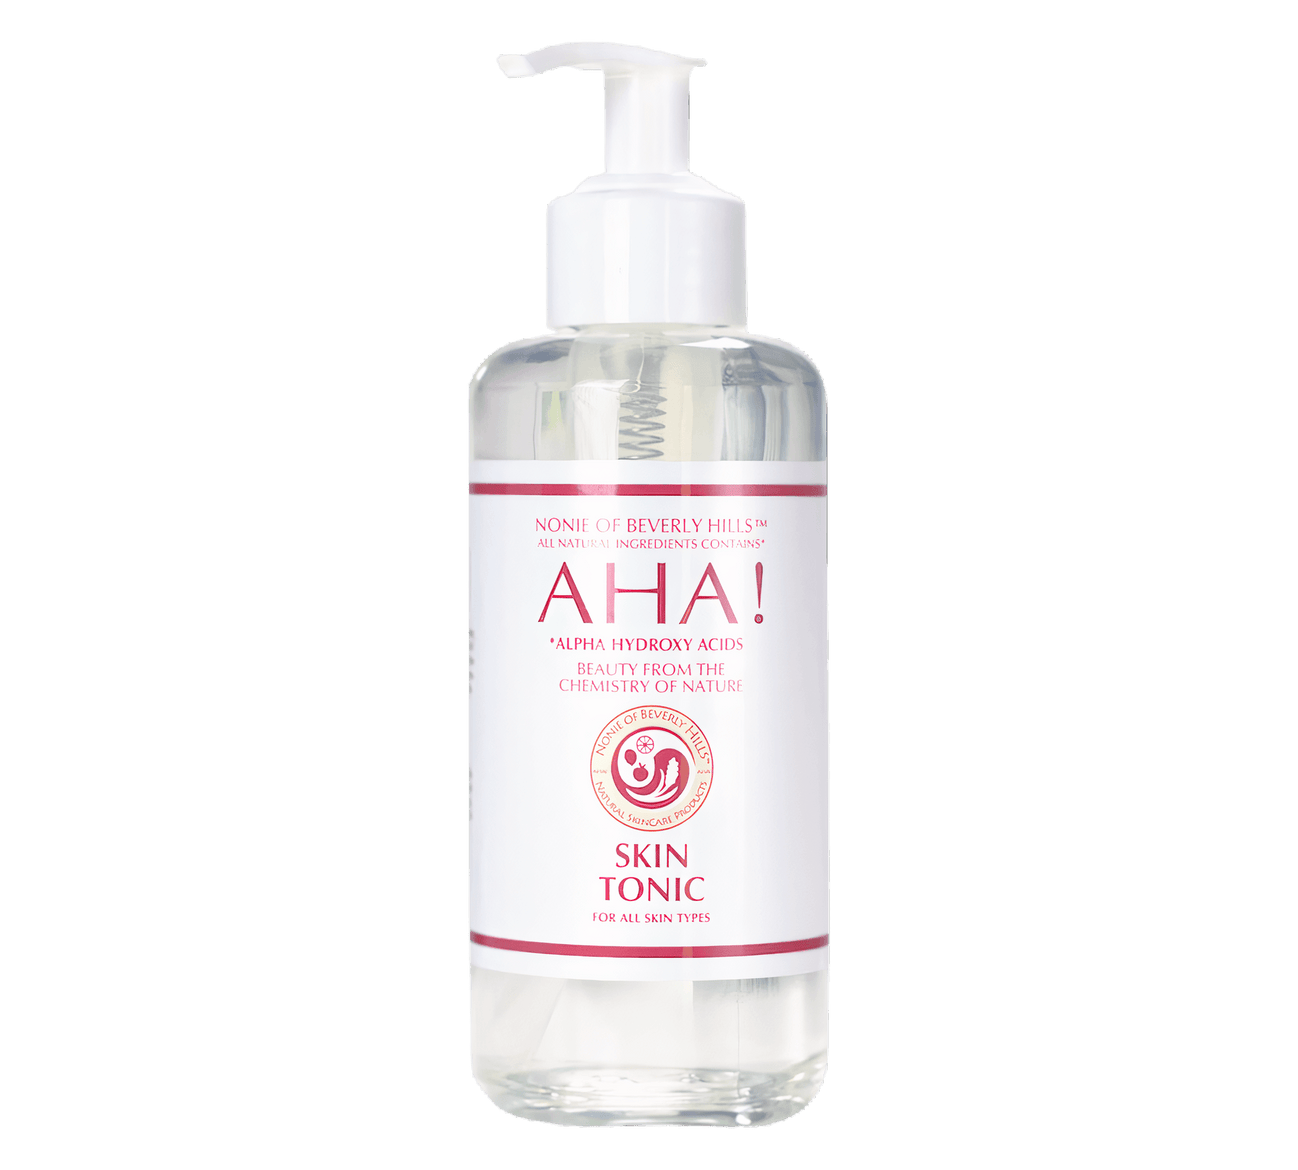 AHA! Skin Tonic 7.0 oz - for All Skin Types - Nonie of Beverly Hills